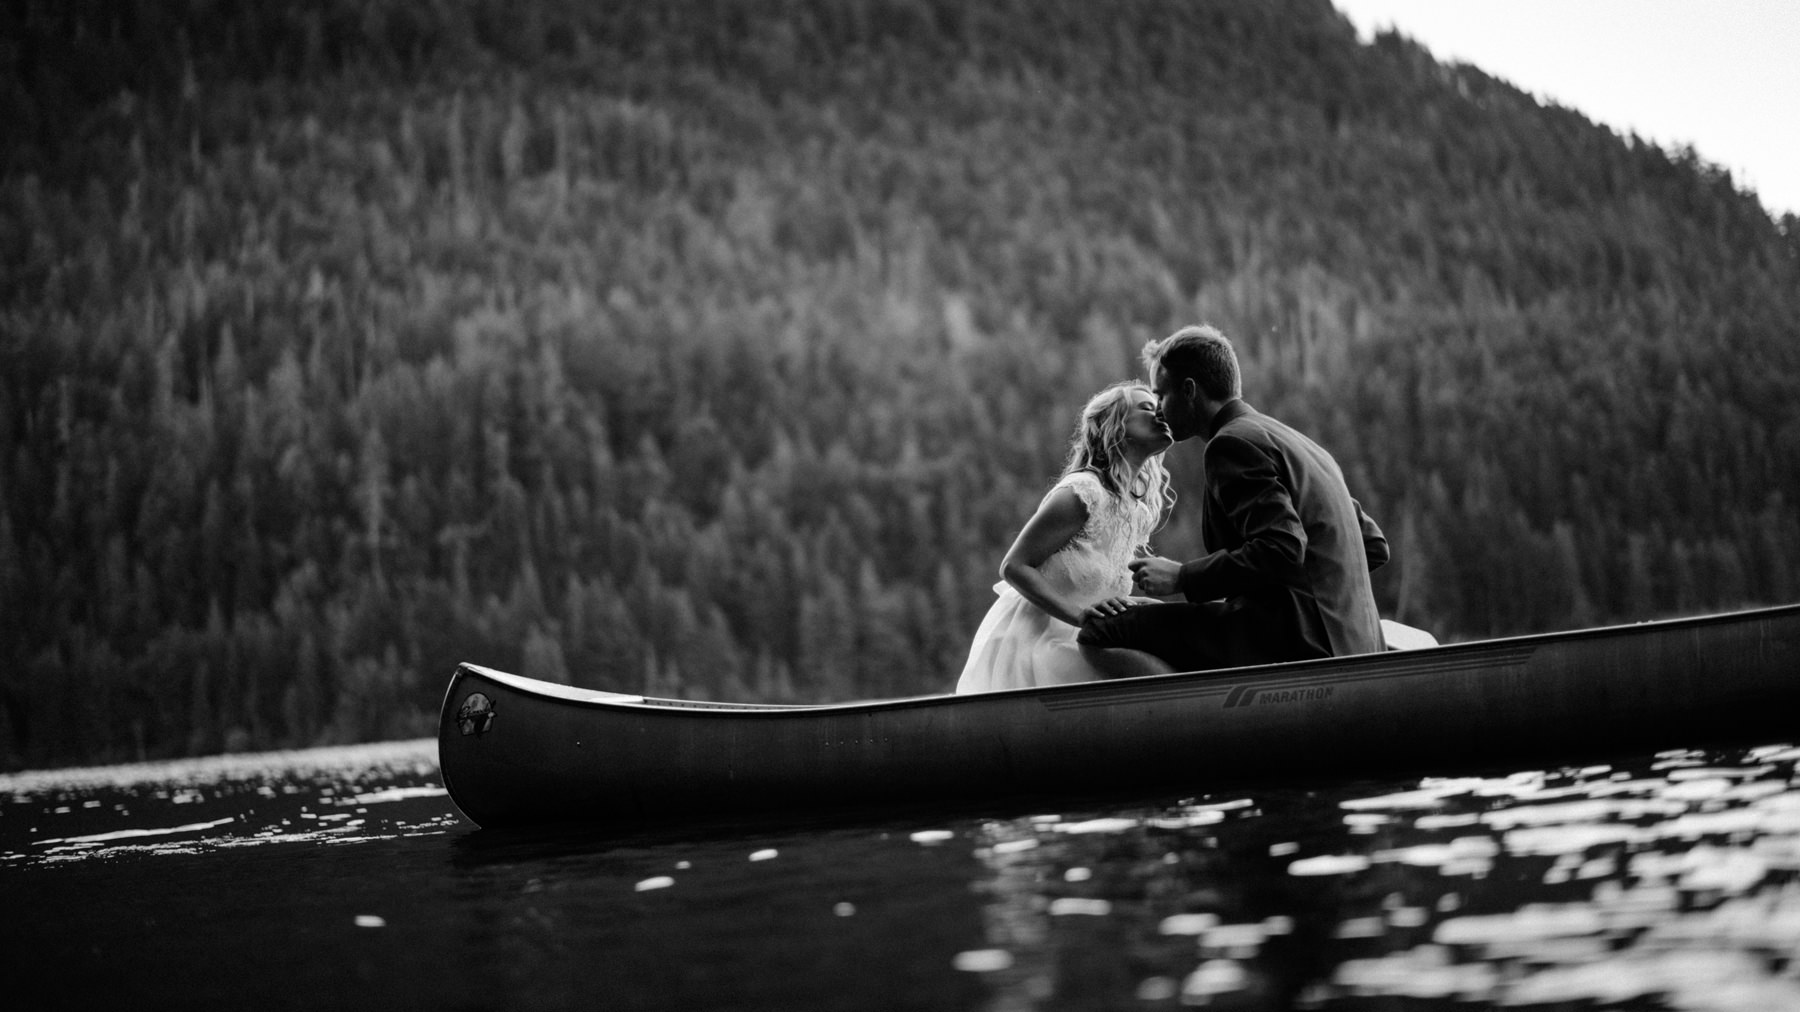 188-bride-and-groom-in-a-canoe-across-lake-crescent-by-nature-bridge.jpg